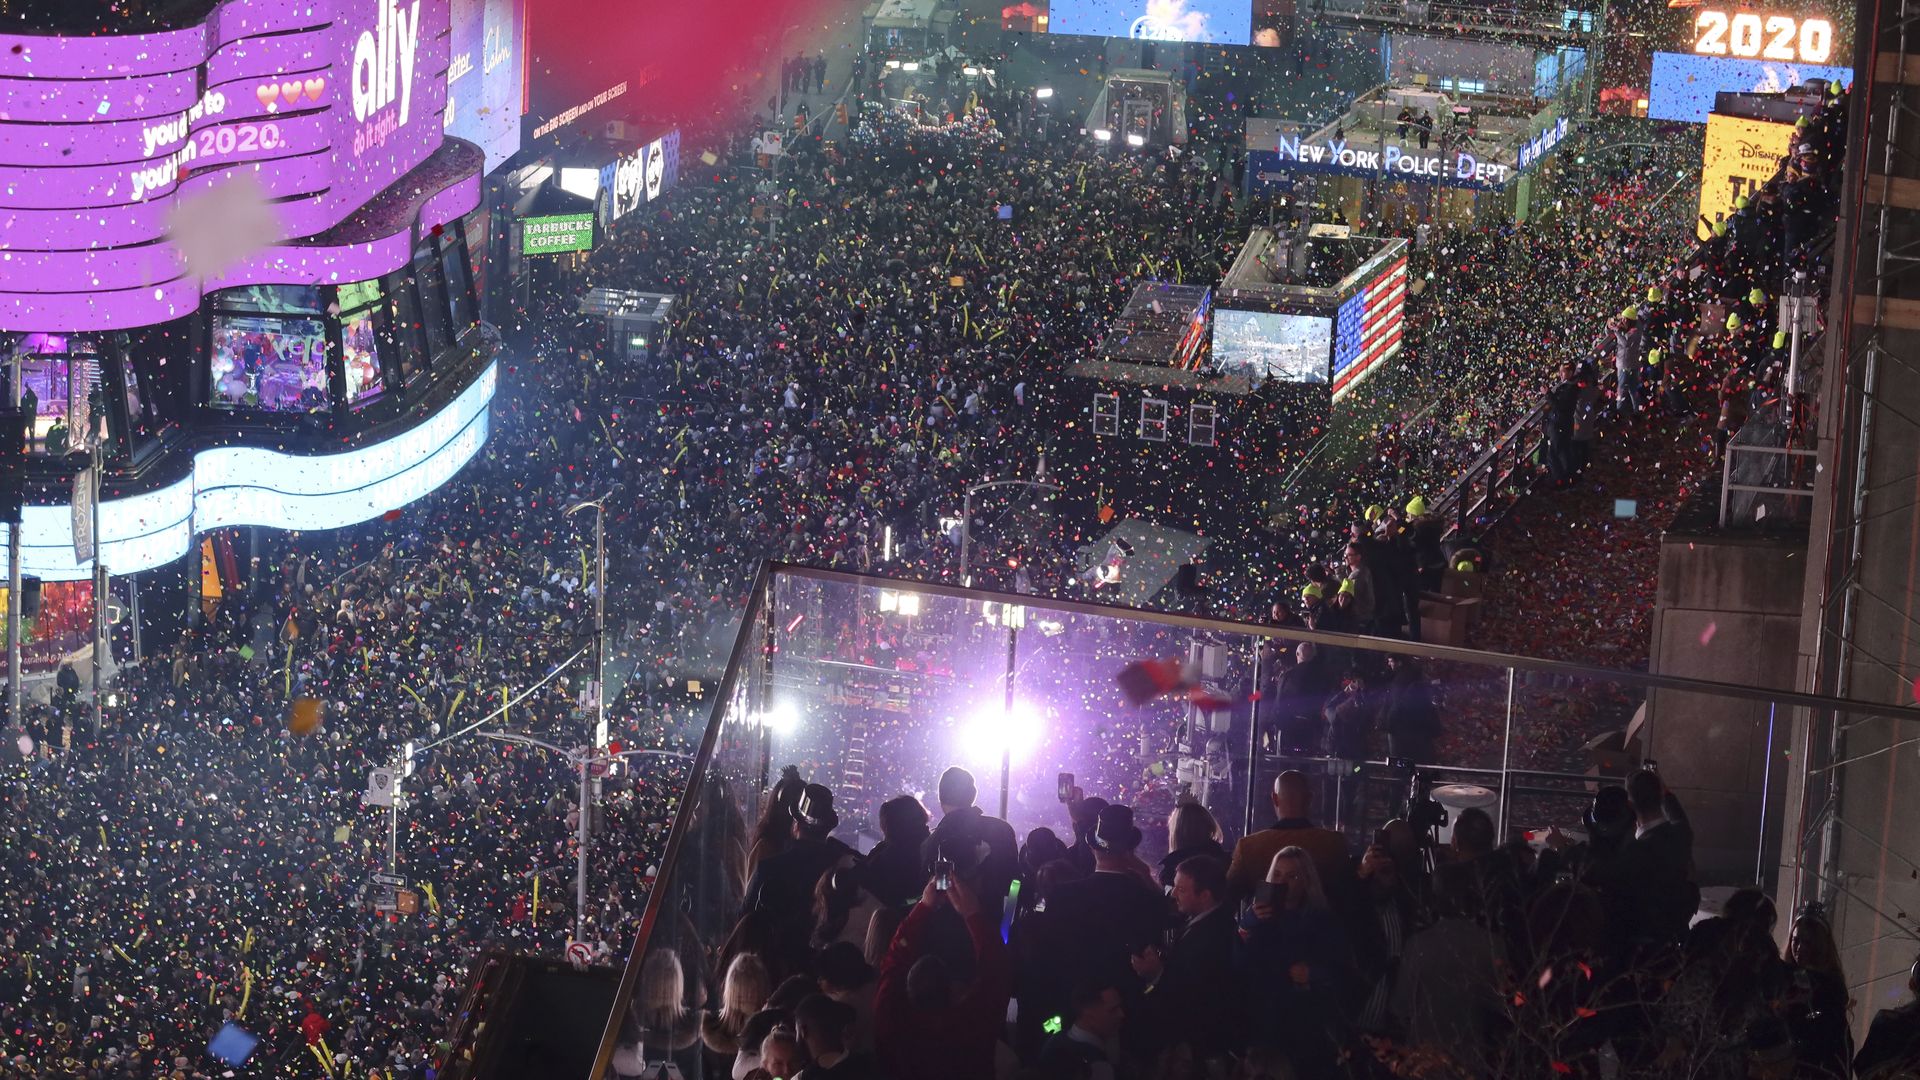 Confetti fills the air over top of revelers during New Year's Eve celebrations in Times Square on January 1, 2020 in New York City.